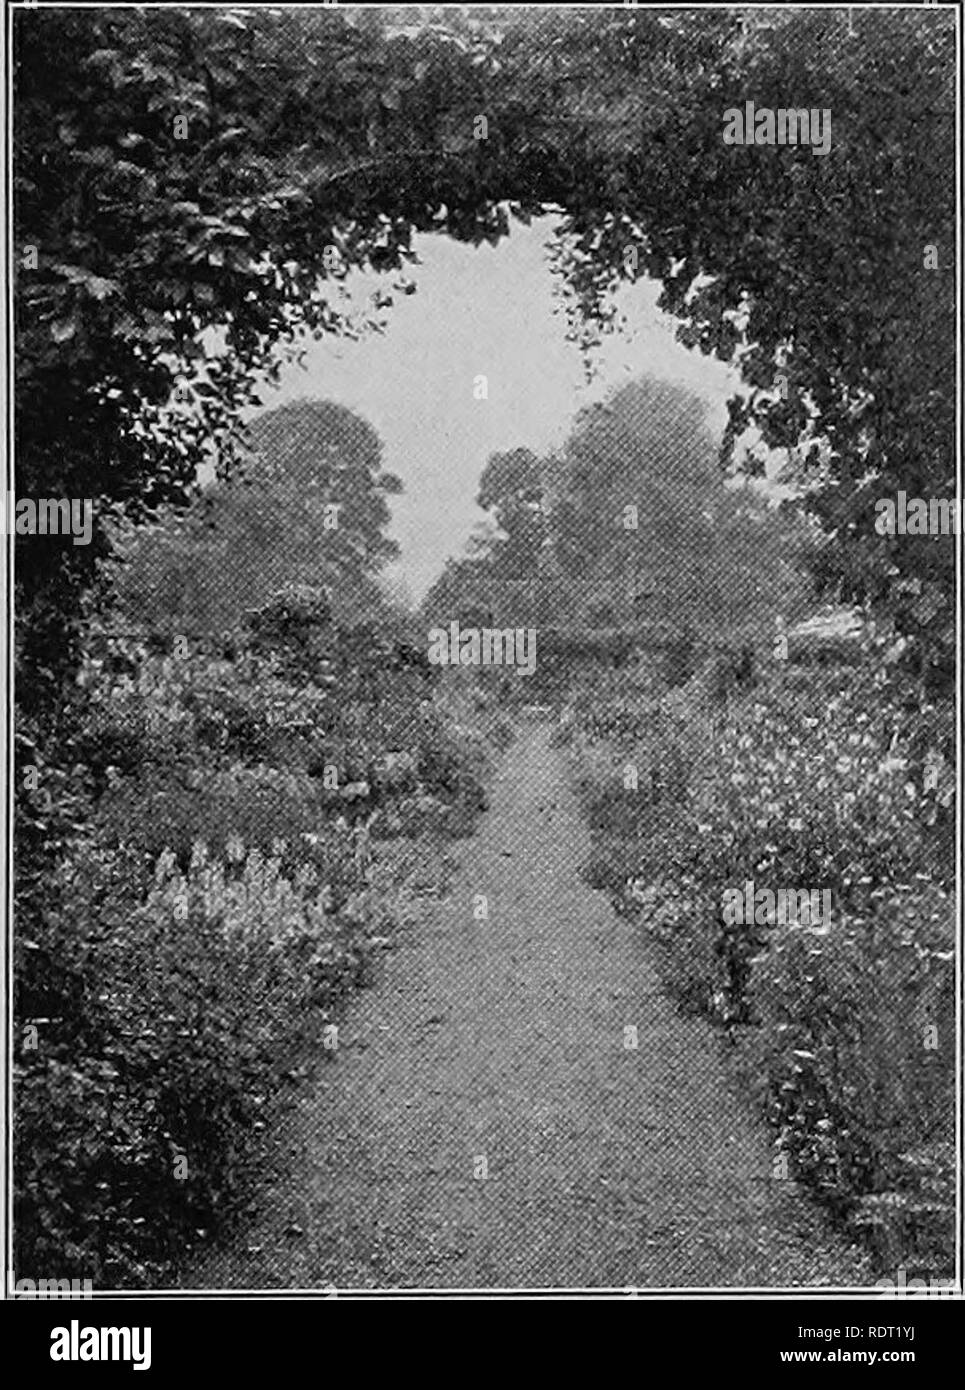 . Garden guide, the amateur gardeners' handbook; how to plan, plant and maintain the home grounds, the suburban garden, the city lot. How to grow good vegetables and fruit. How to care for roses and other favorite flowers, hardy plants, trees, shrubs, lawns, porch plants and window boxes. Chapters on garden furniture and accessories, with selected lists of plants, etc. Heavily illustrated with teaching plans and diagrams and reproduced photographes, all made expressly for this great little text book ... Gardening. HARDY FLOWERS 59 sum rubrum and album, is good; the Peonies will have finished f Stock Photo